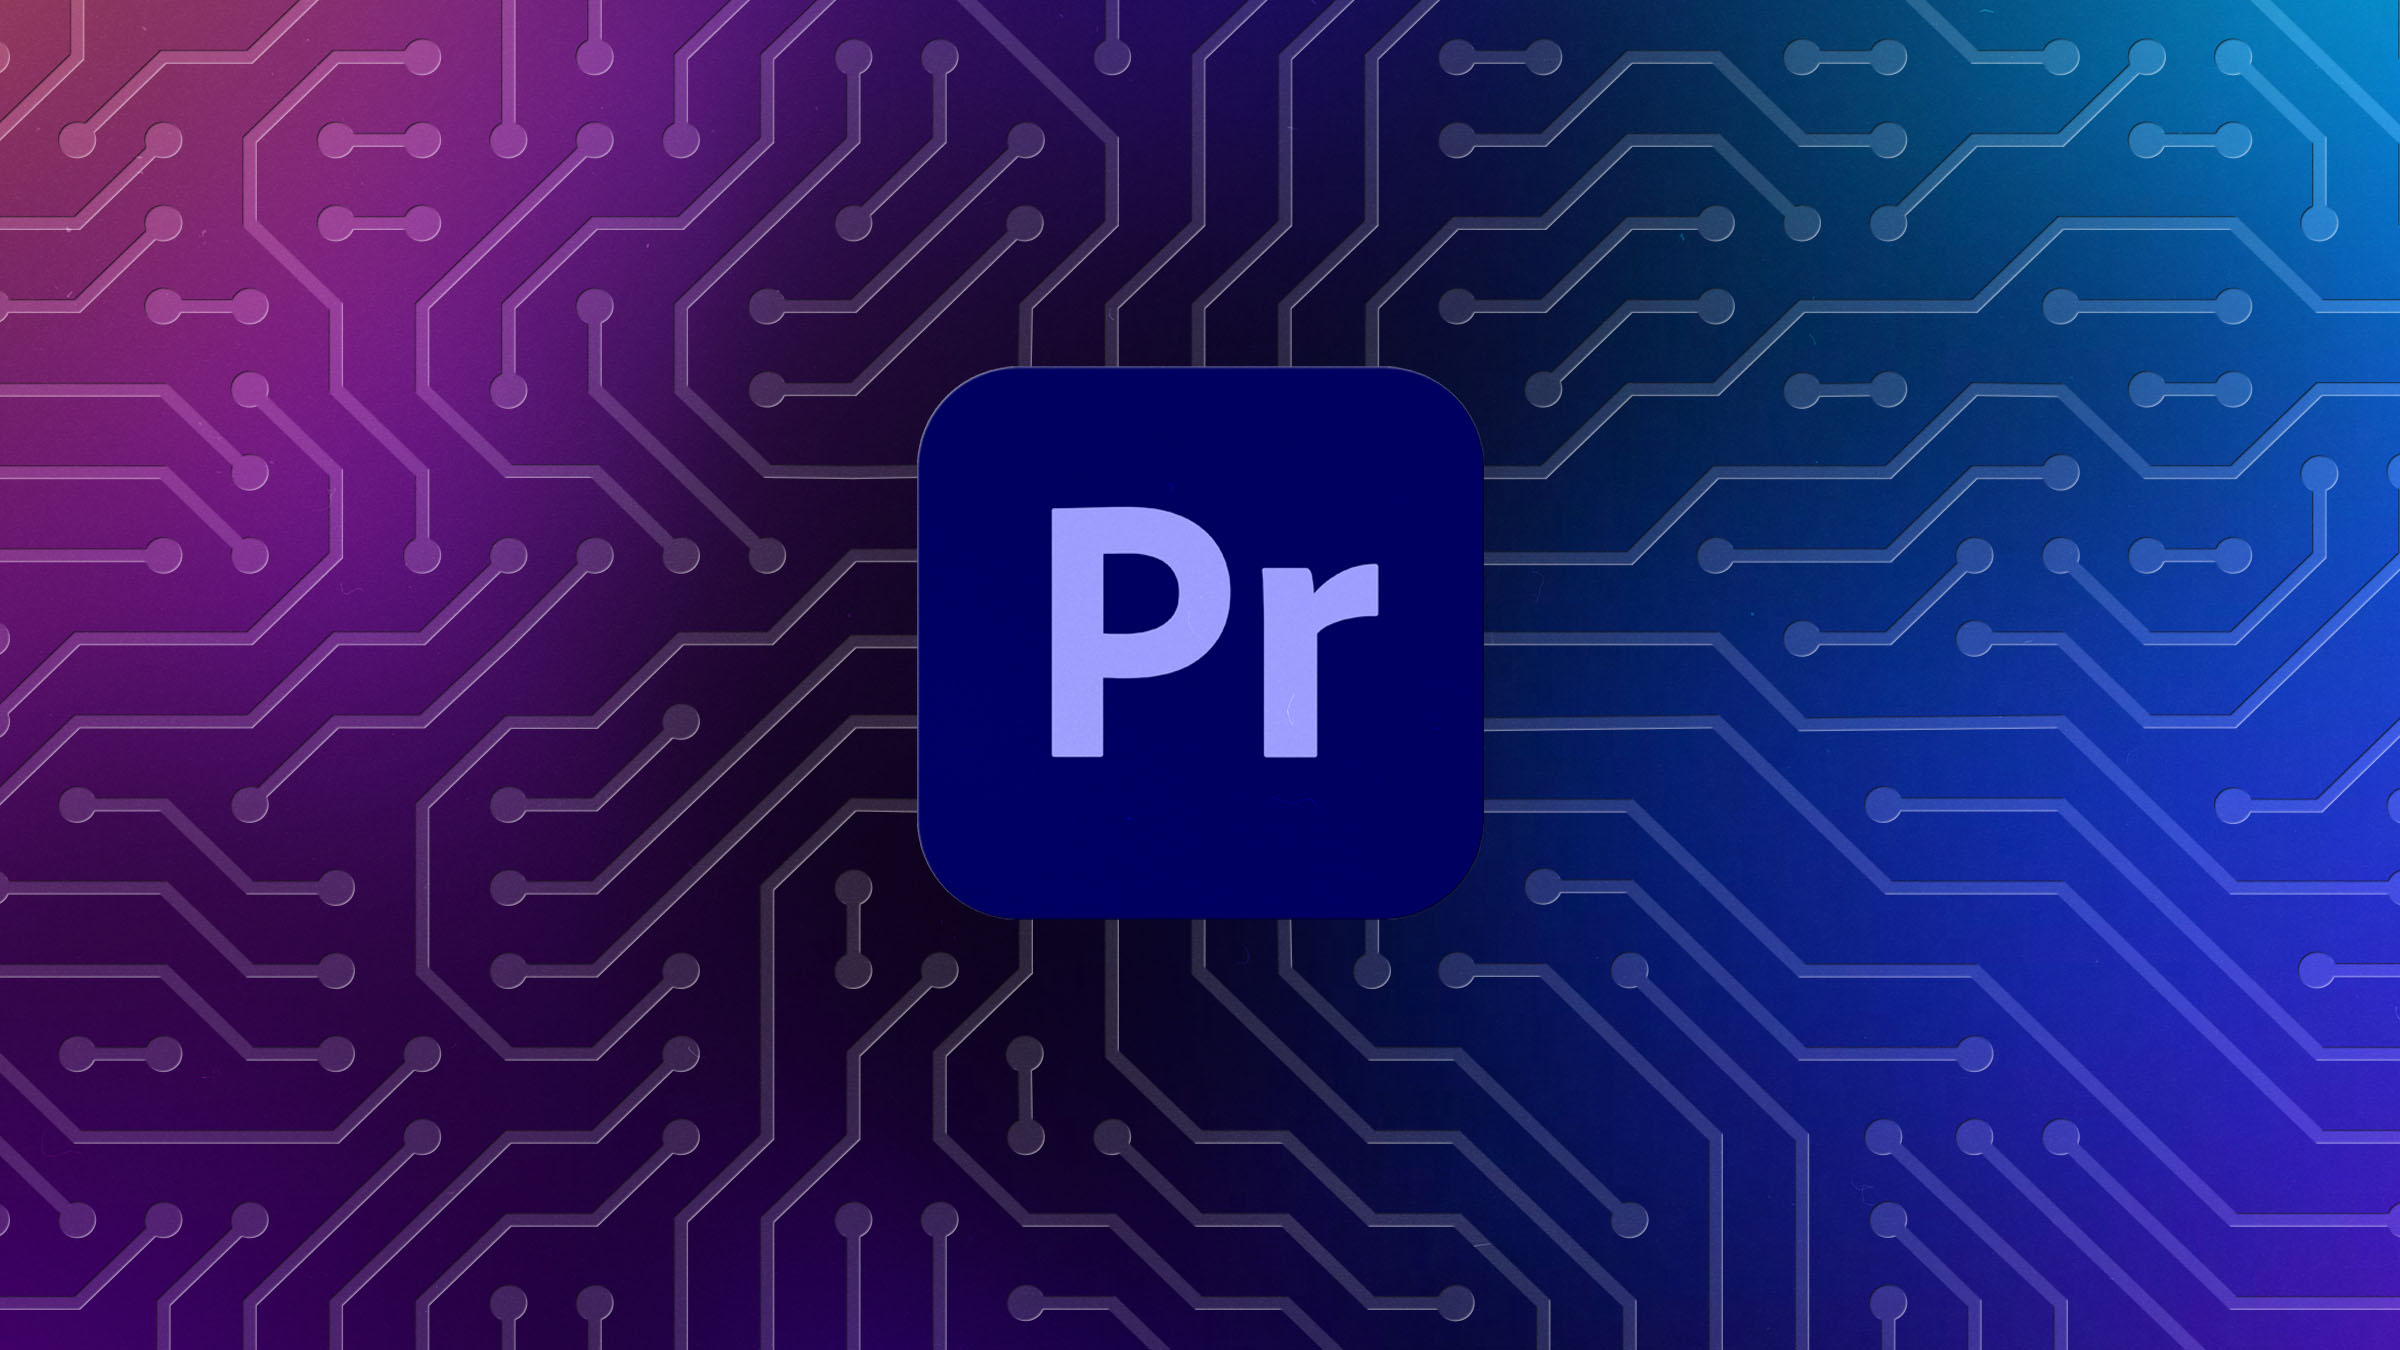 Troubleshooting Premiere Pro: How to Diagnose and Fix Common Problems